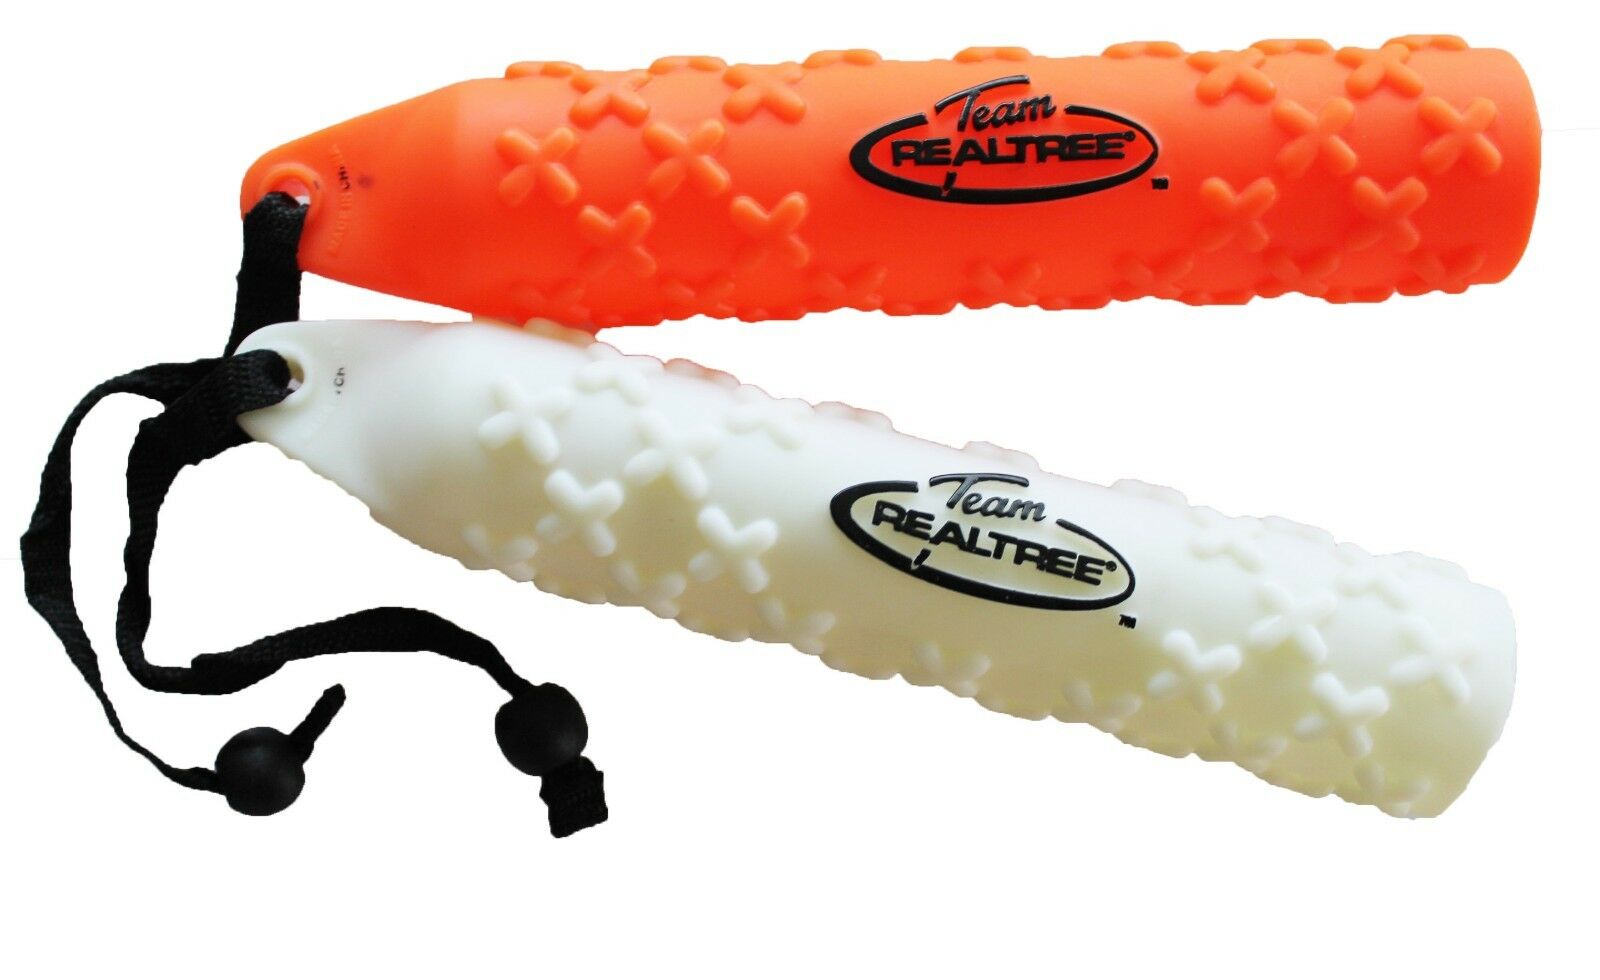 2-pack Team Realtree Rubber Dog Training Hunting Dummies Bumpers Orange & White